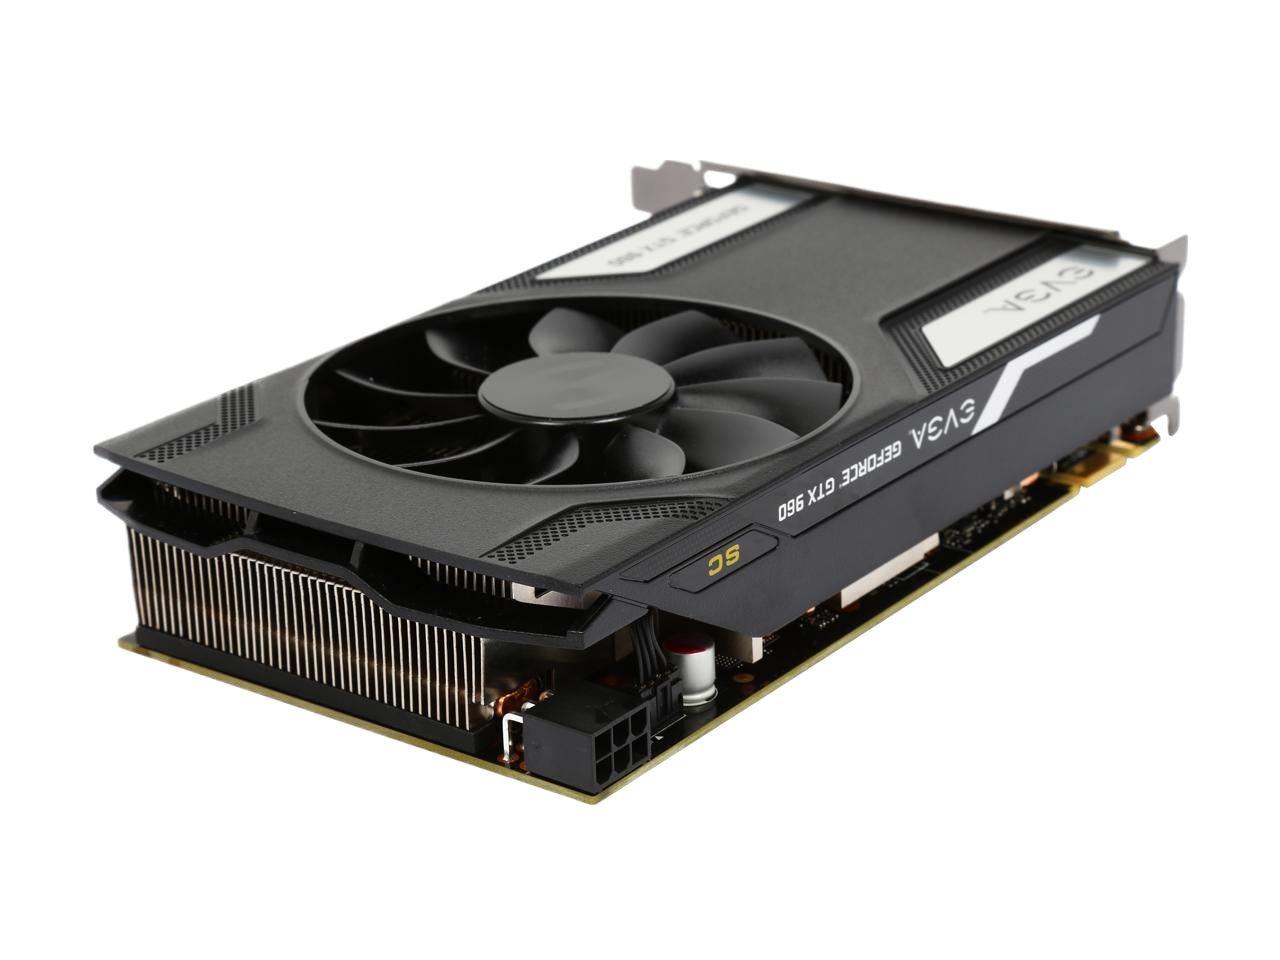 EVGA GeForce GTX 960 2GB SC GAMING Only 6.8 Inches Perfect for ITX Build Graphics Card 02G-P4-2962-KR